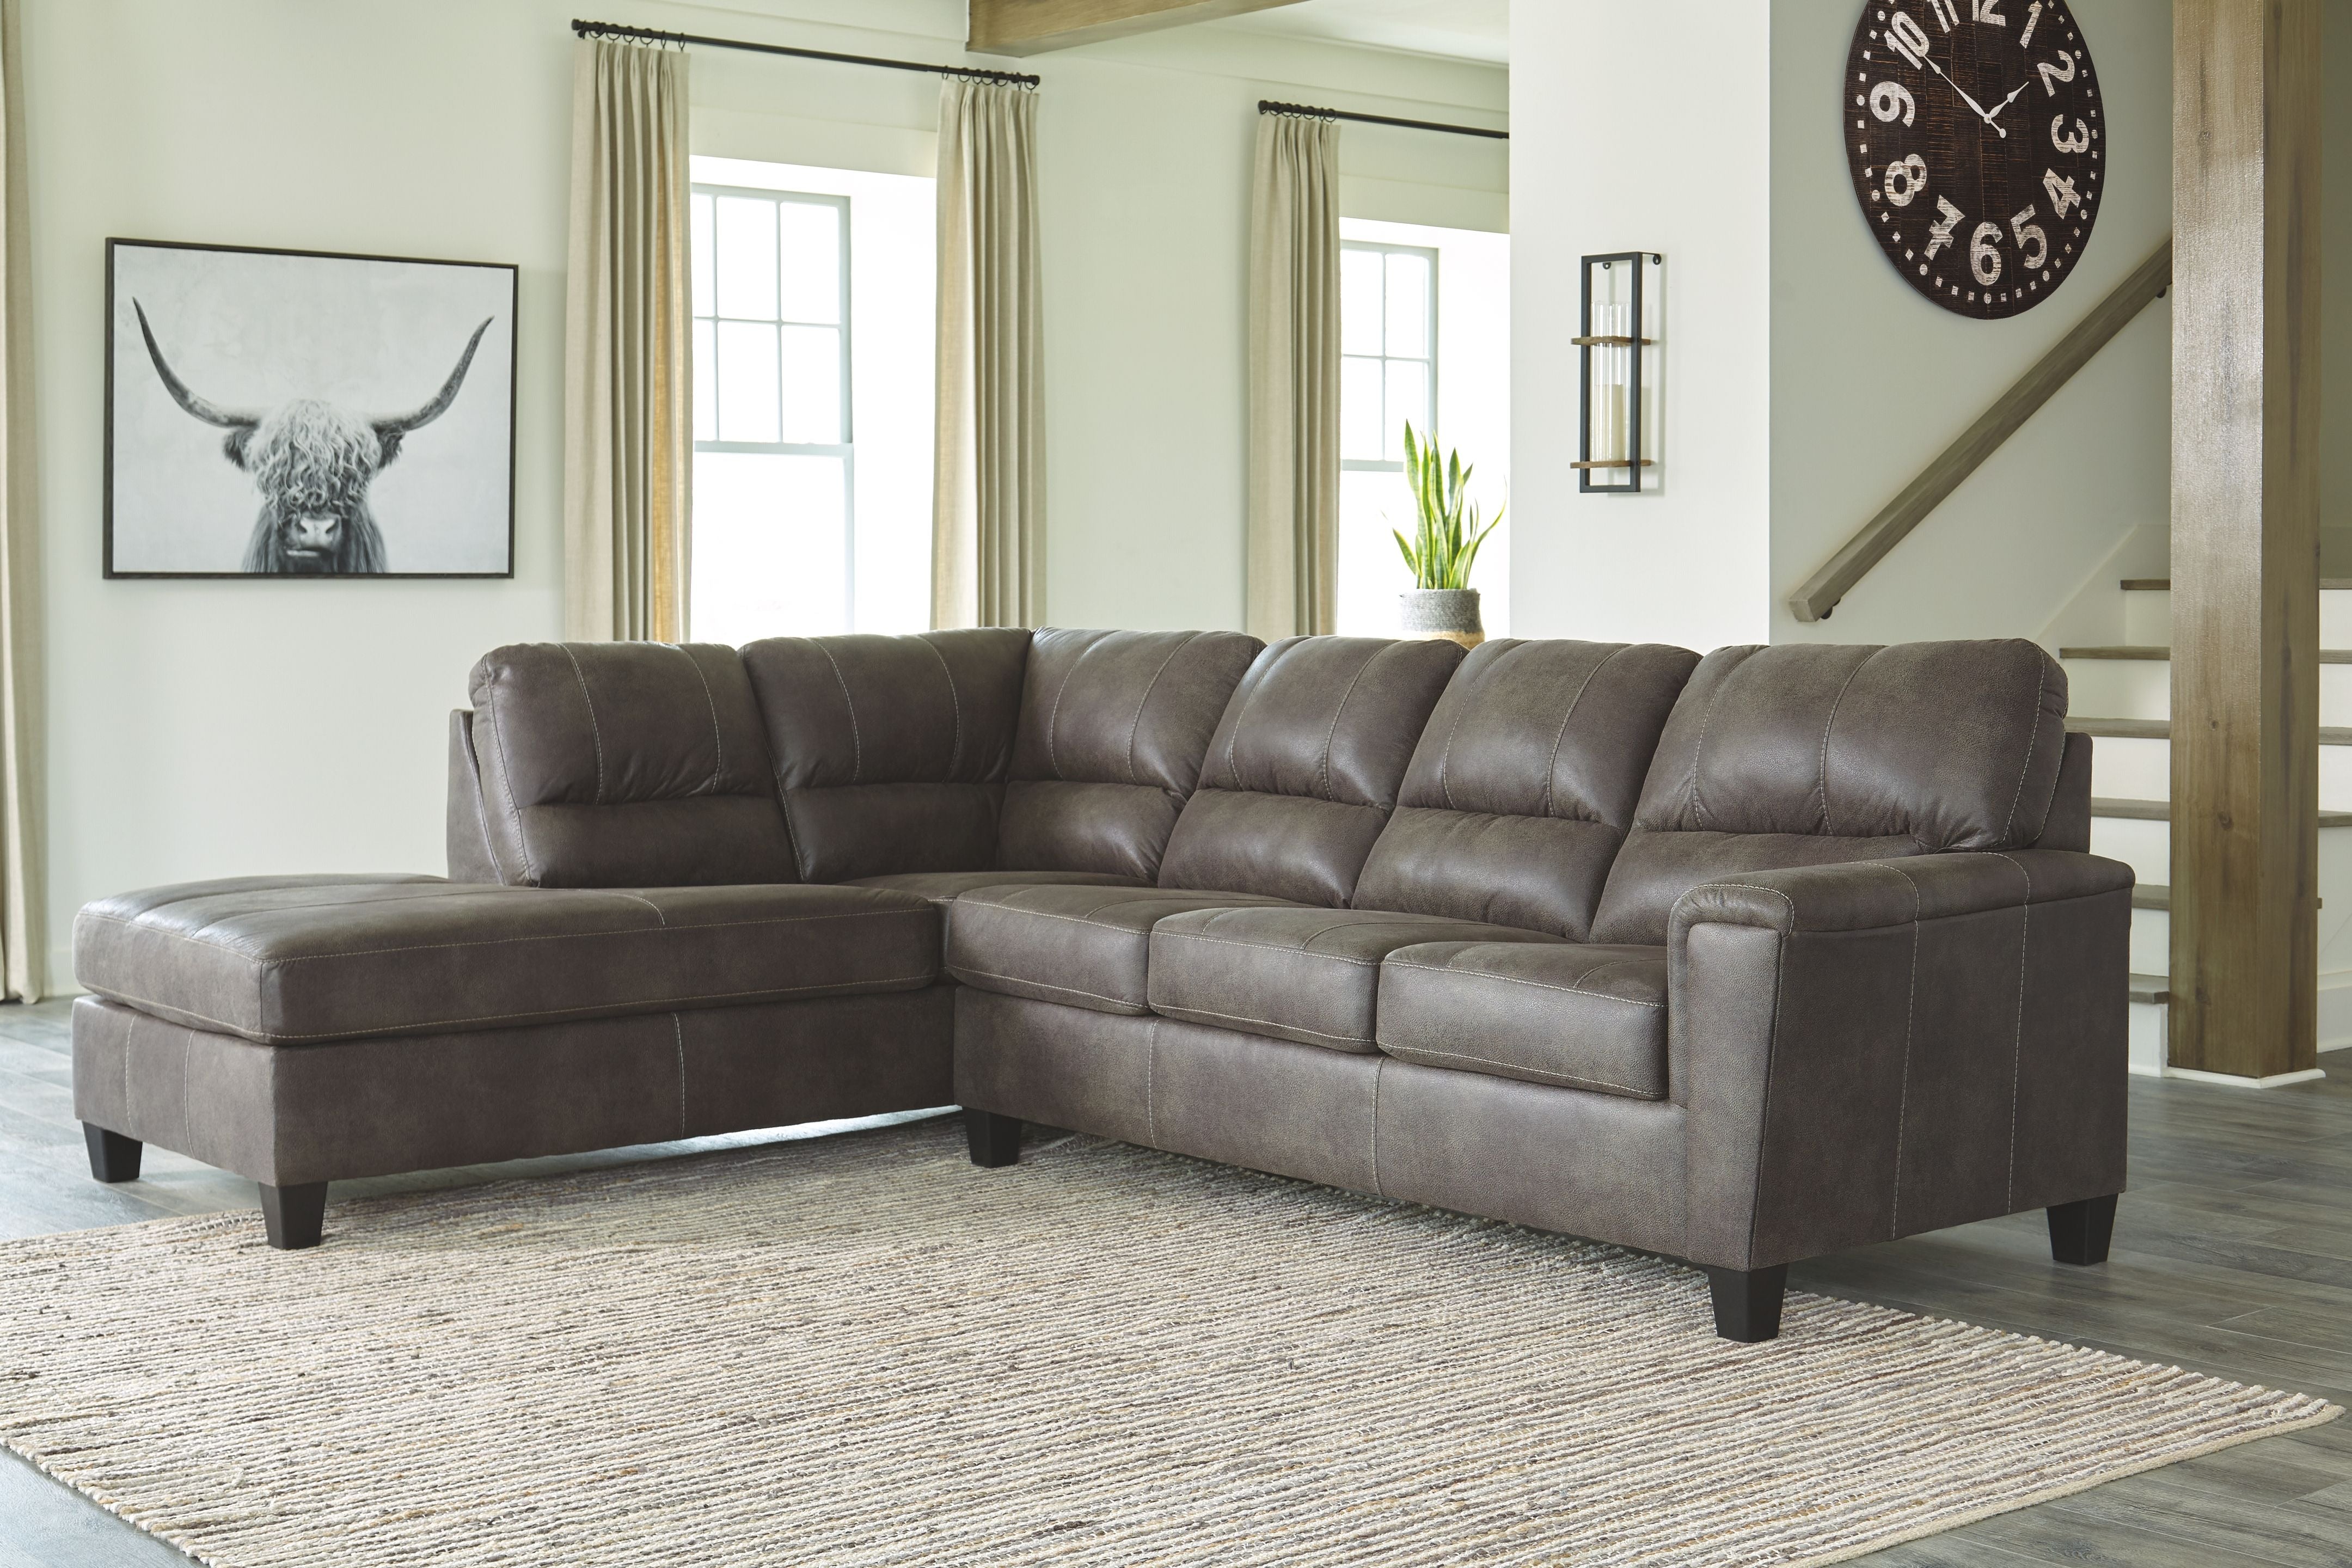 Navi Faux Leather Sleeper Sectional w/ Chaise